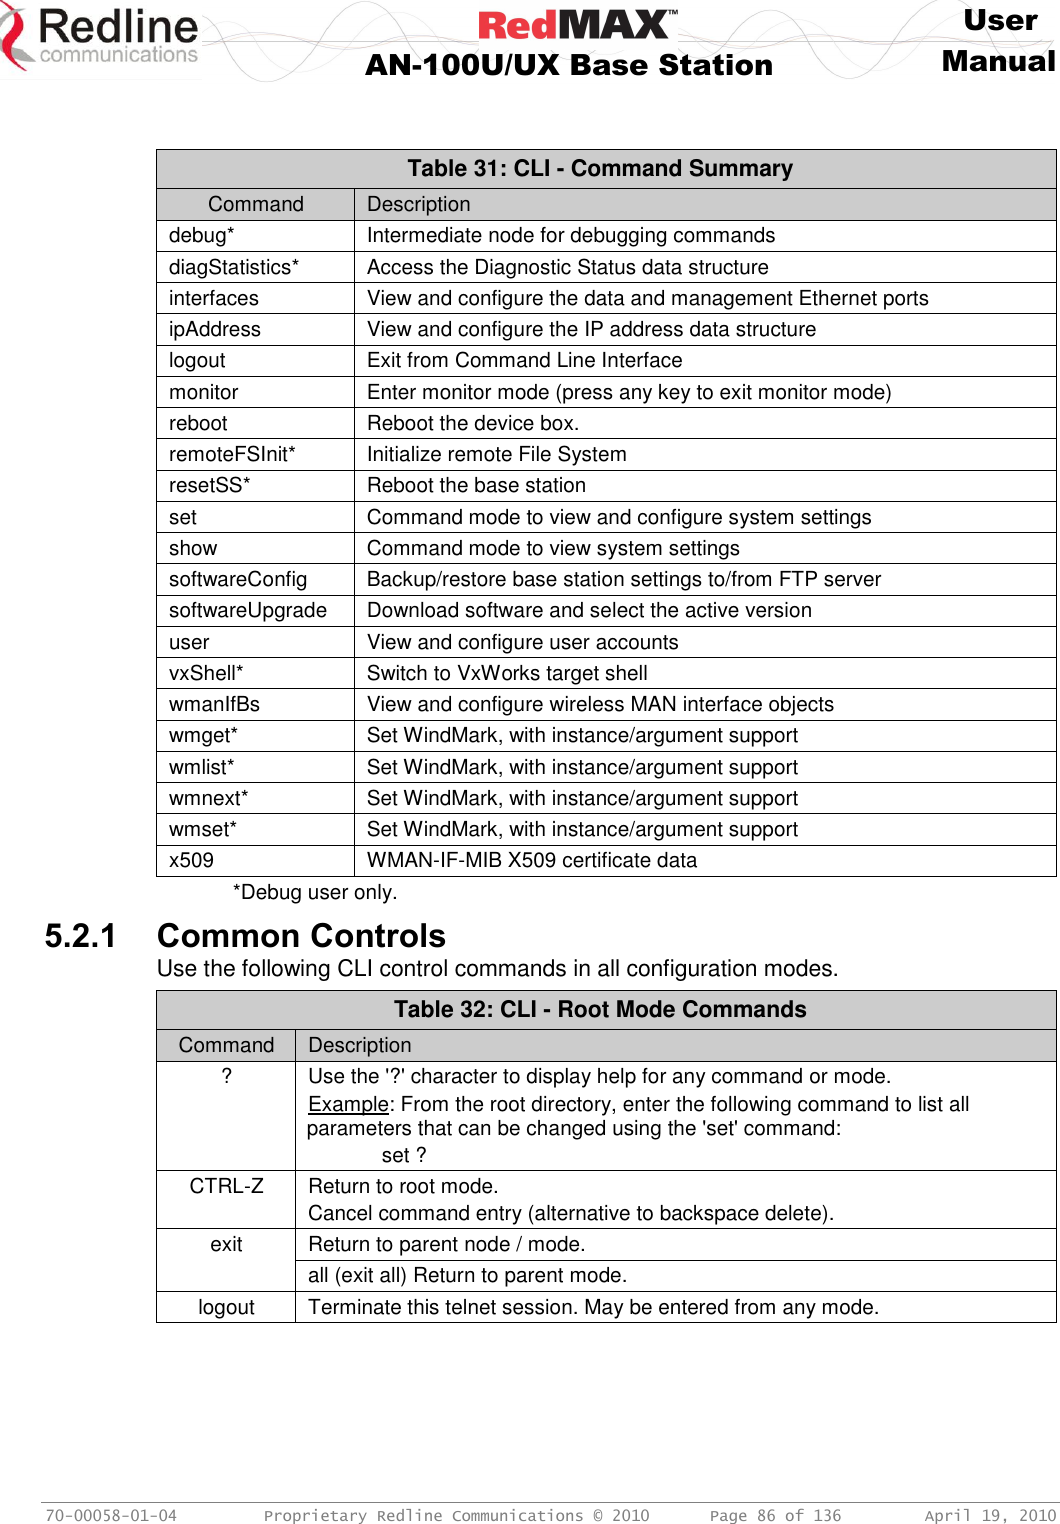     User  AN-100U/UX Base Station Manual   70-00058-01-04  Proprietary Redline Communications © 2010   Page 86 of 136  April 19, 2010   Table 31: CLI - Command Summary Command Description debug* Intermediate node for debugging commands diagStatistics* Access the Diagnostic Status data structure interfaces View and configure the data and management Ethernet ports ipAddress View and configure the IP address data structure logout Exit from Command Line Interface monitor Enter monitor mode (press any key to exit monitor mode) reboot Reboot the device box. remoteFSInit* Initialize remote File System resetSS* Reboot the base station  set Command mode to view and configure system settings show Command mode to view system settings softwareConfig Backup/restore base station settings to/from FTP server softwareUpgrade Download software and select the active version user View and configure user accounts vxShell* Switch to VxWorks target shell wmanIfBs View and configure wireless MAN interface objects wmget* Set WindMark, with instance/argument support wmlist* Set WindMark, with instance/argument support wmnext* Set WindMark, with instance/argument support wmset* Set WindMark, with instance/argument support x509 WMAN-IF-MIB X509 certificate data *Debug user only. 5.2.1 Common Controls Use the following CLI control commands in all configuration modes. Table 32: CLI - Root Mode Commands Command Description ? Use the &apos;?&apos; character to display help for any command or mode. Example: From the root directory, enter the following command to list all parameters that can be changed using the &apos;set&apos; command:   set ? CTRL-Z Return to root mode. Cancel command entry (alternative to backspace delete). exit  Return to parent node / mode. all (exit all) Return to parent mode. logout Terminate this telnet session. May be entered from any mode.  